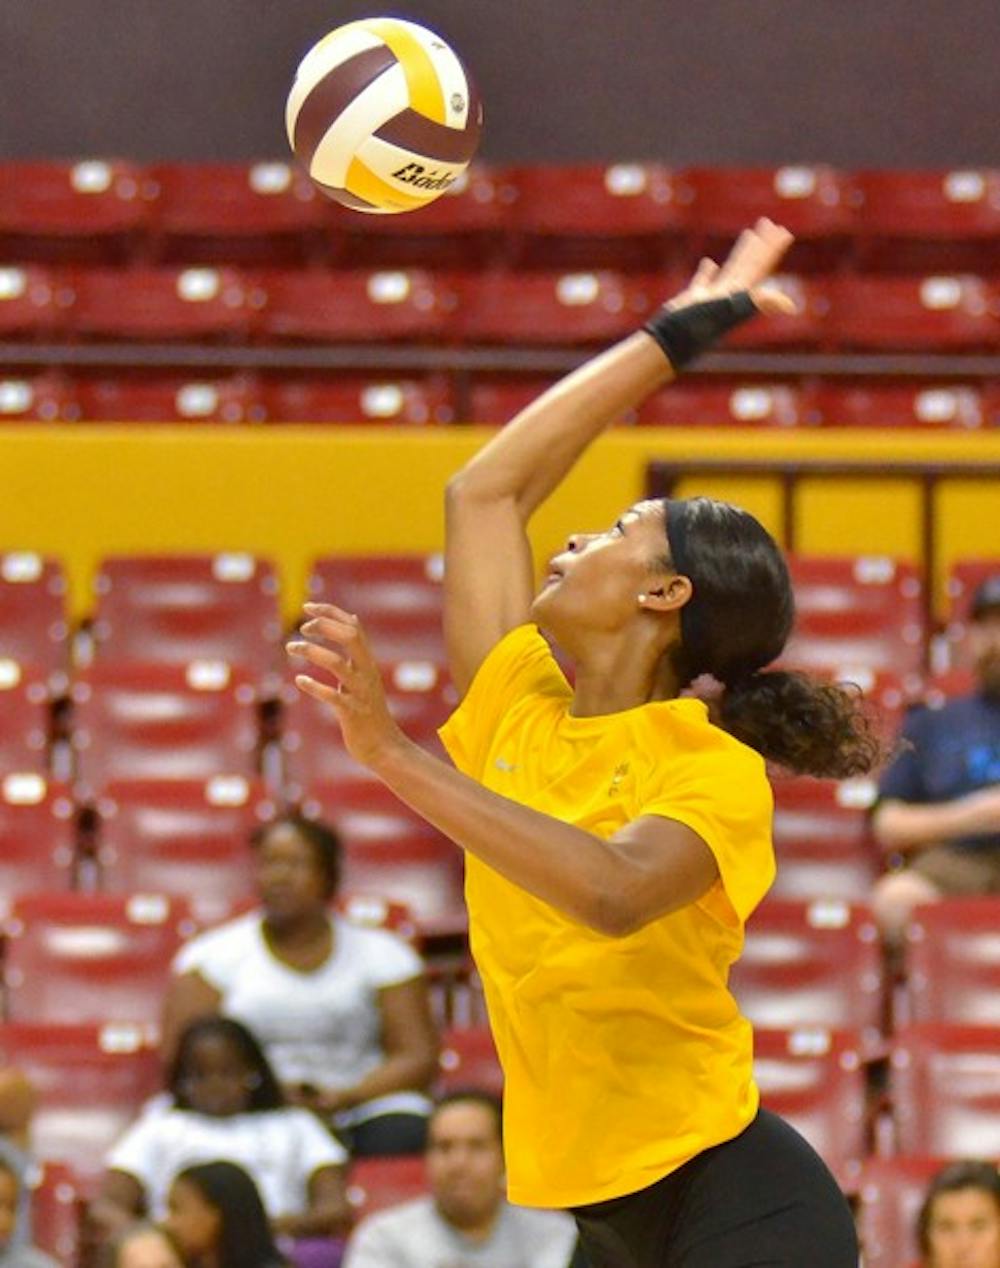 SERVE'S UP: ASU junior middle blocker Erica Wilson swings her arm on a serve during the preseason Alumnae Match. Wilson and the SUn Devils will play their road opener Friday at the Iowa State Challenge. (Photo by Aaron Lavinsky)